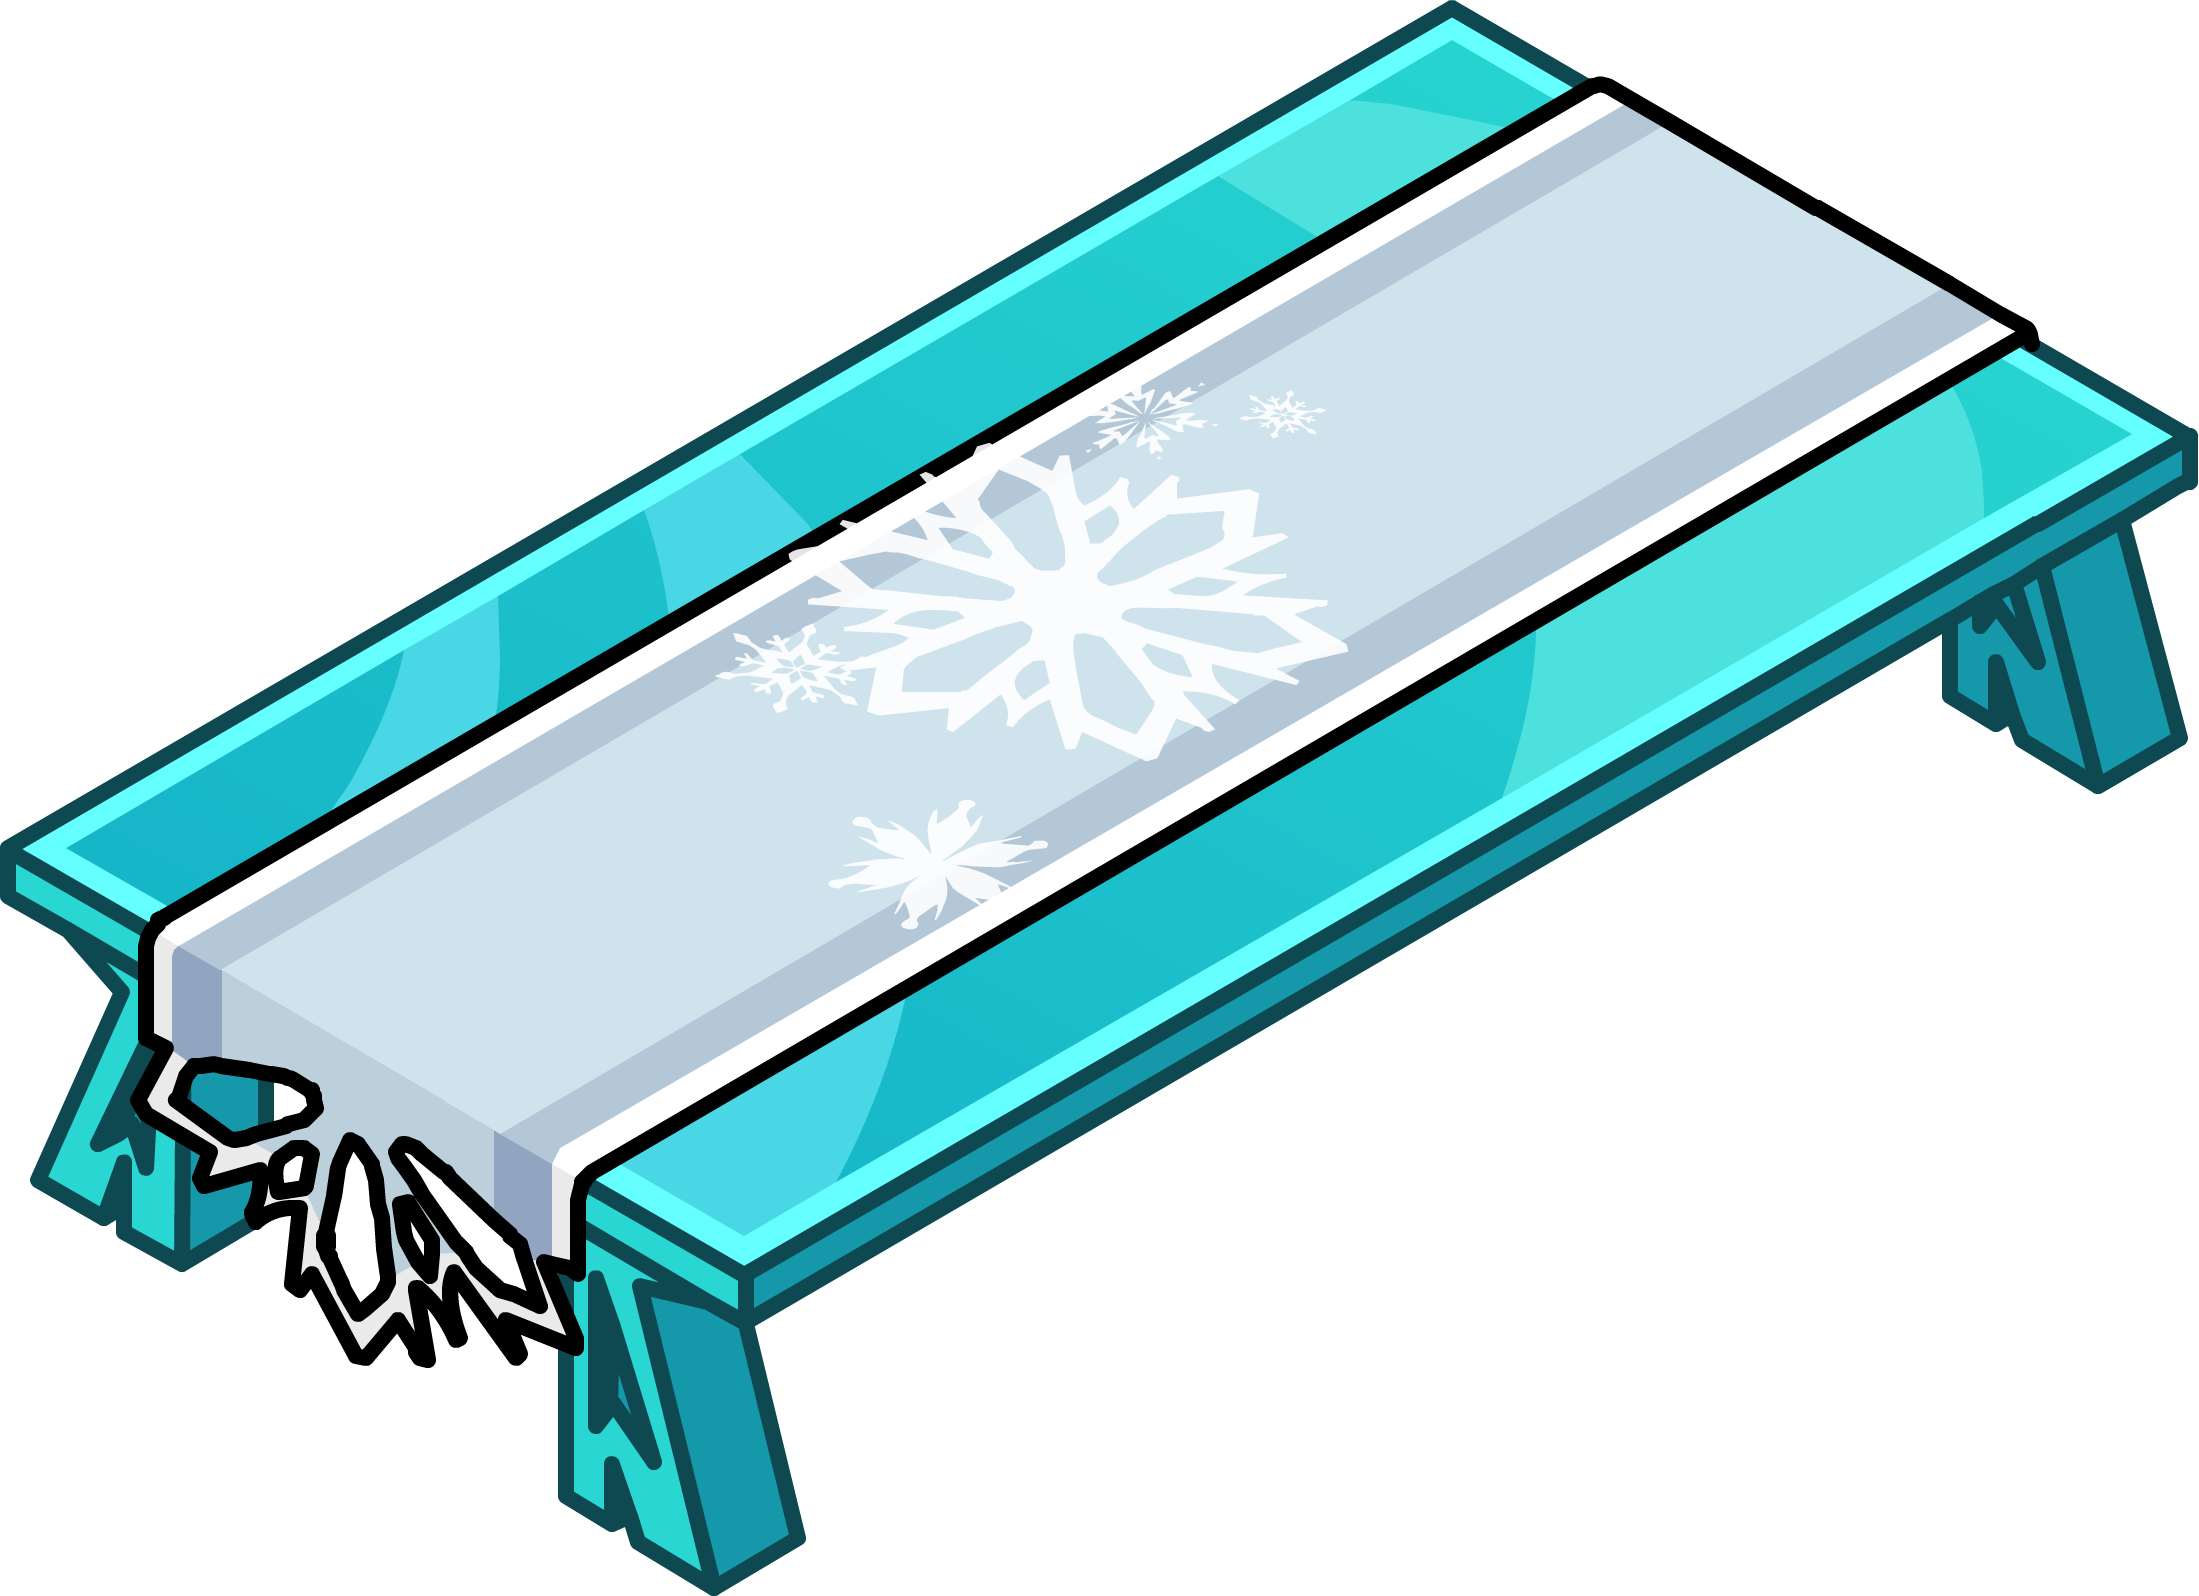 http://img2.wikia.nocookie.net/__cb20140807230911/clubpenguin/images/8/8b/Ice_Dining_Table_icon.png